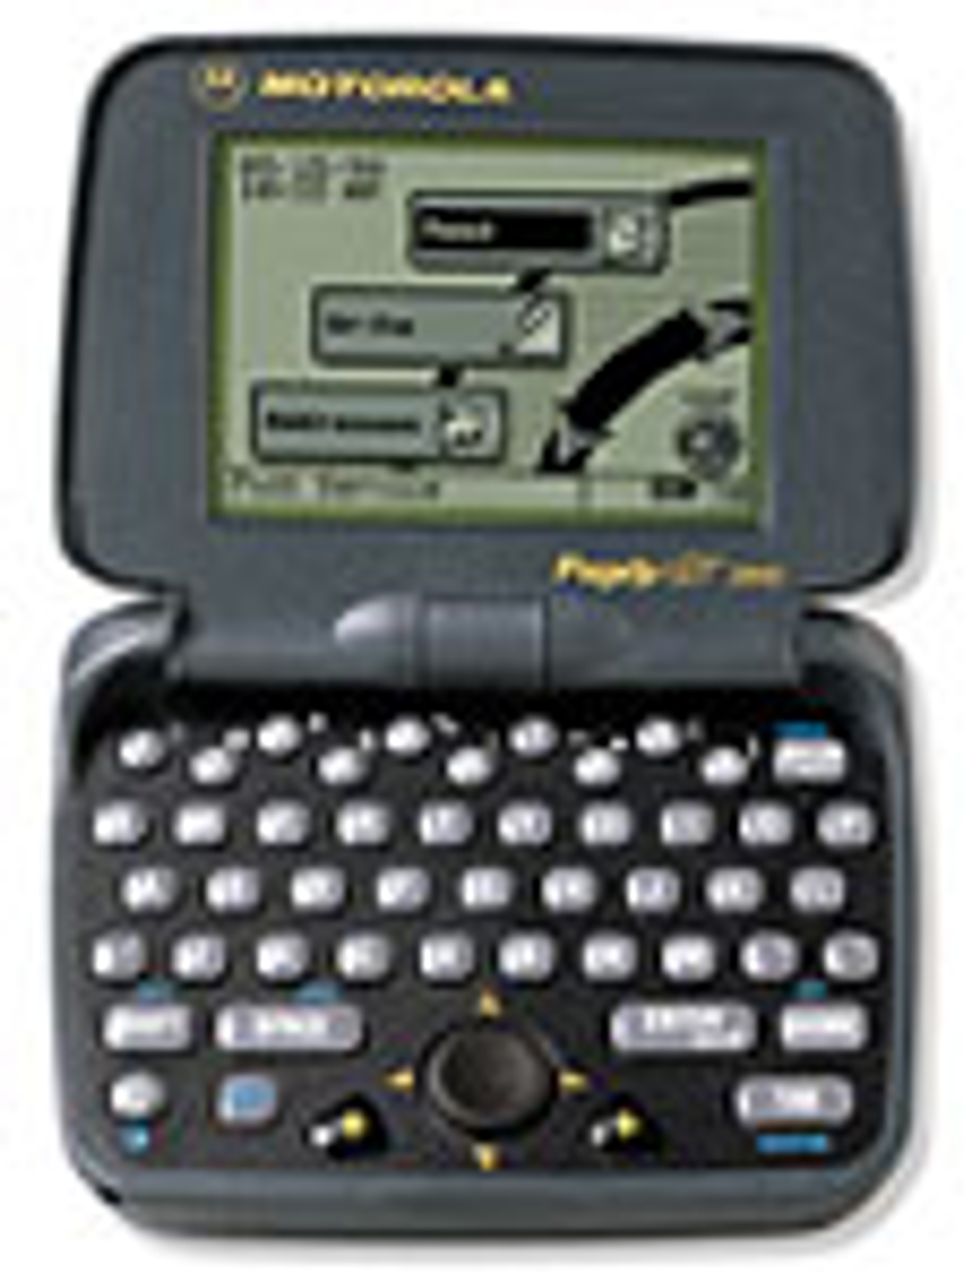 pagewriter 2000x two-way pager